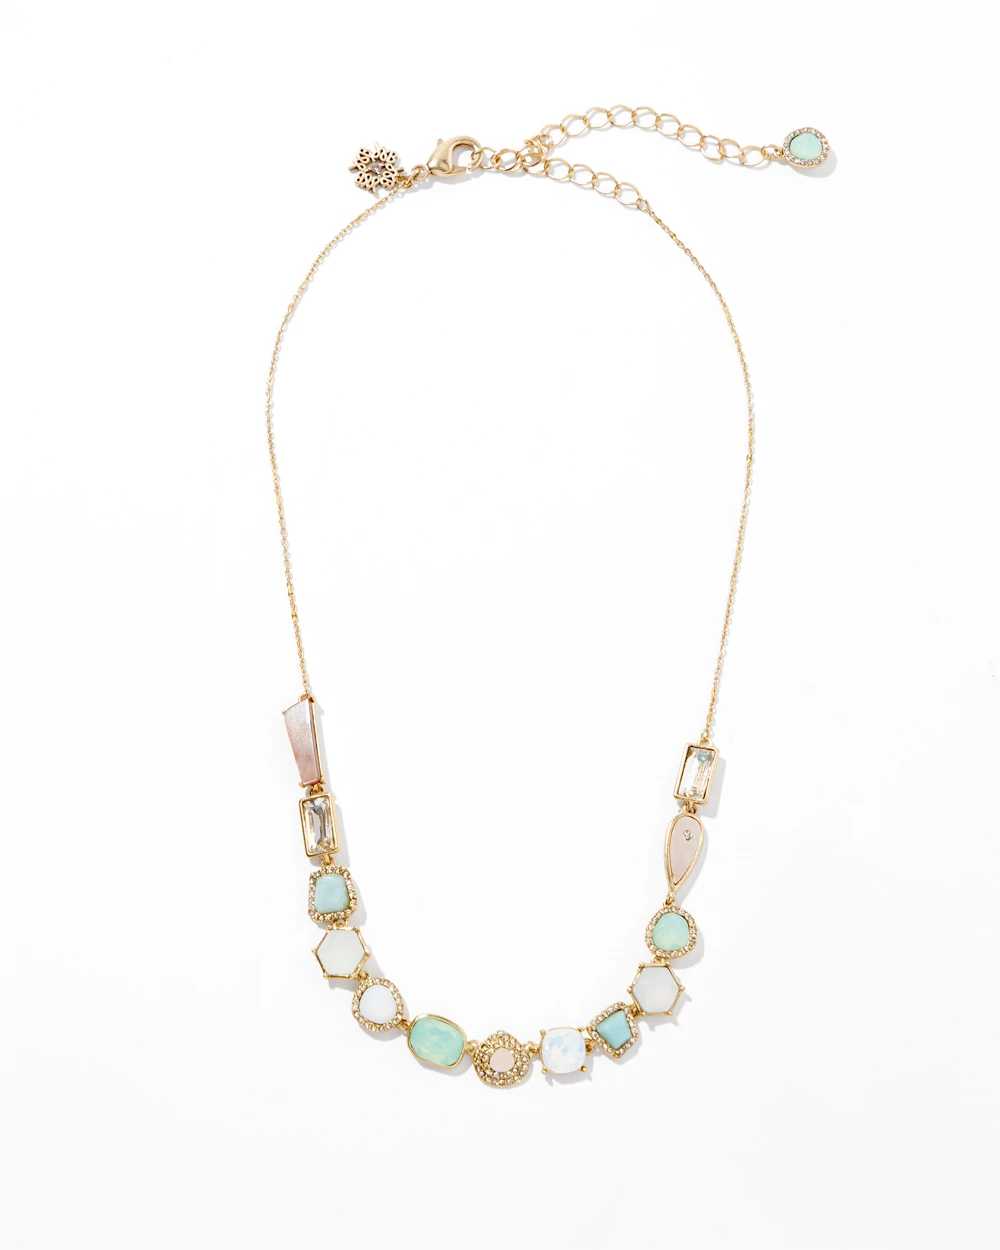 Gold Pave Stone Single Strand Necklace click to view larger image.